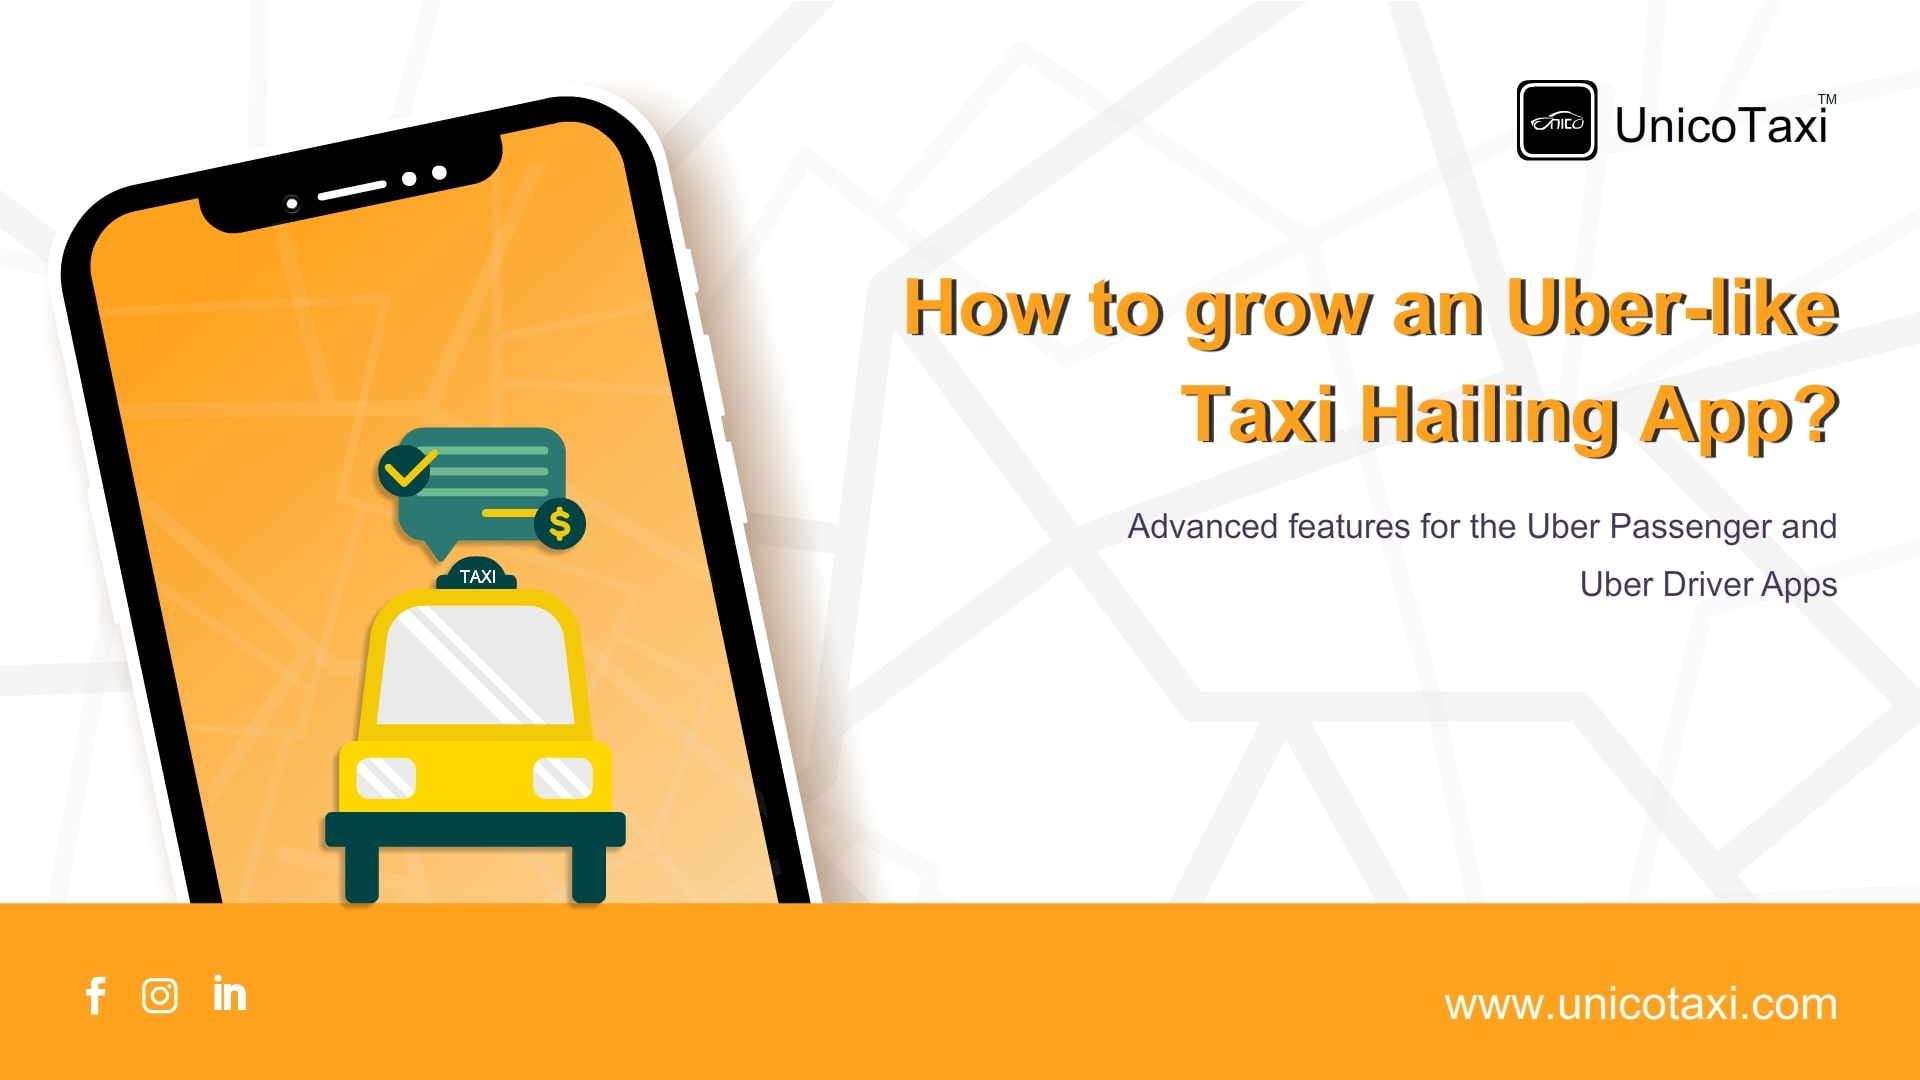 How To Grow Uber like Taxi Hailing App? Advanced Features